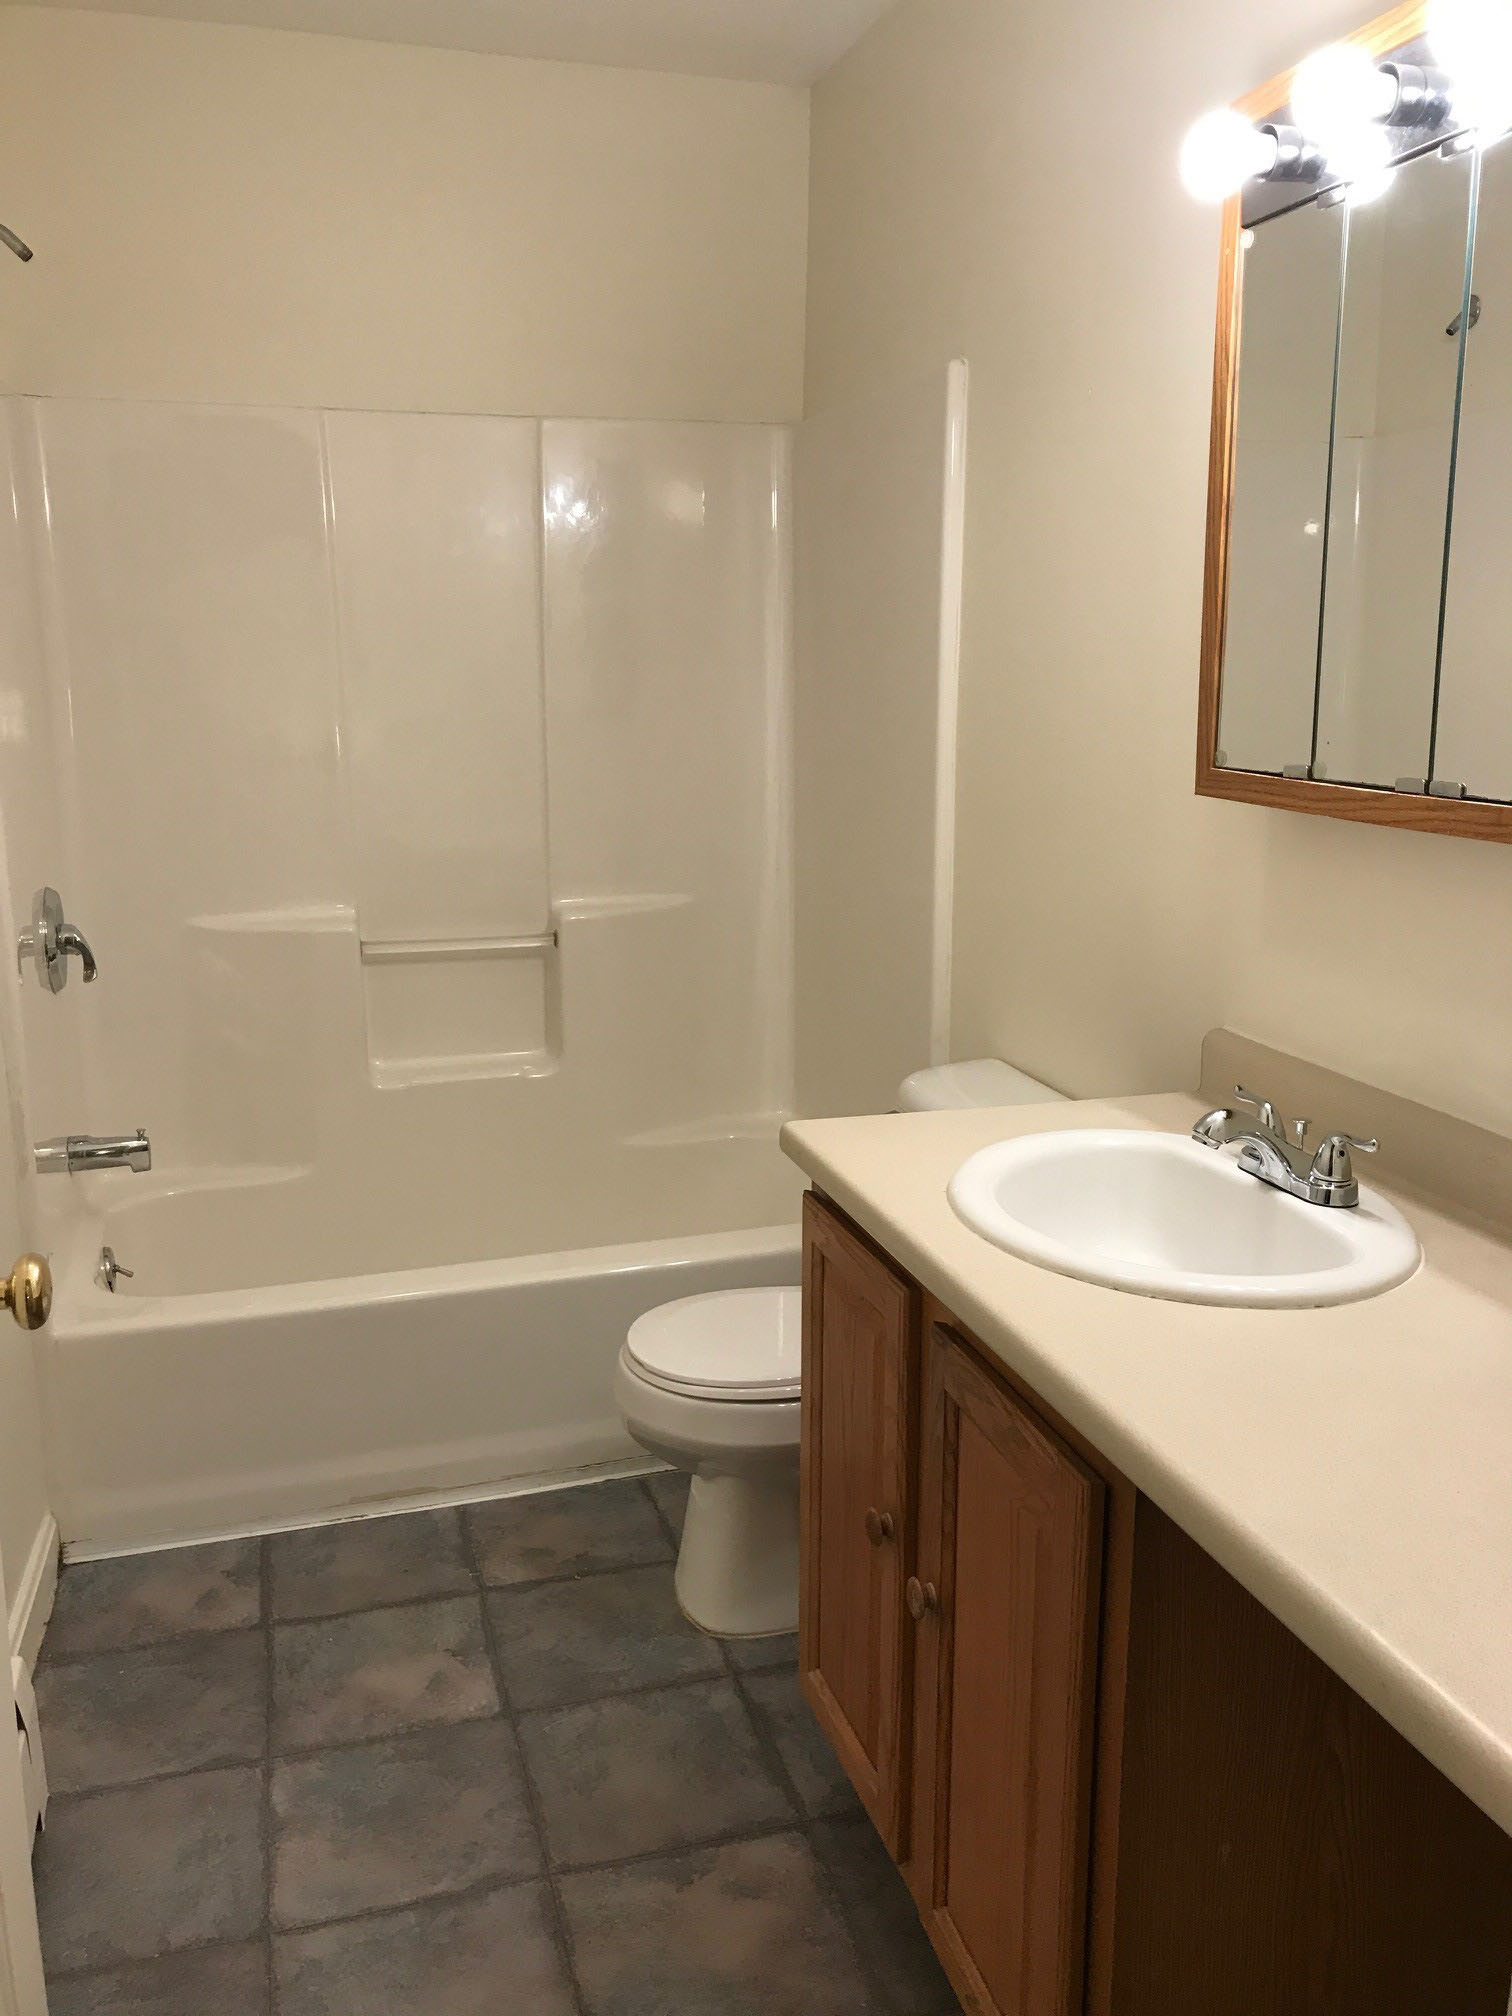 Cohas Overlook full bath by Socha Companies is a quality townhouse community in Manchester, NH